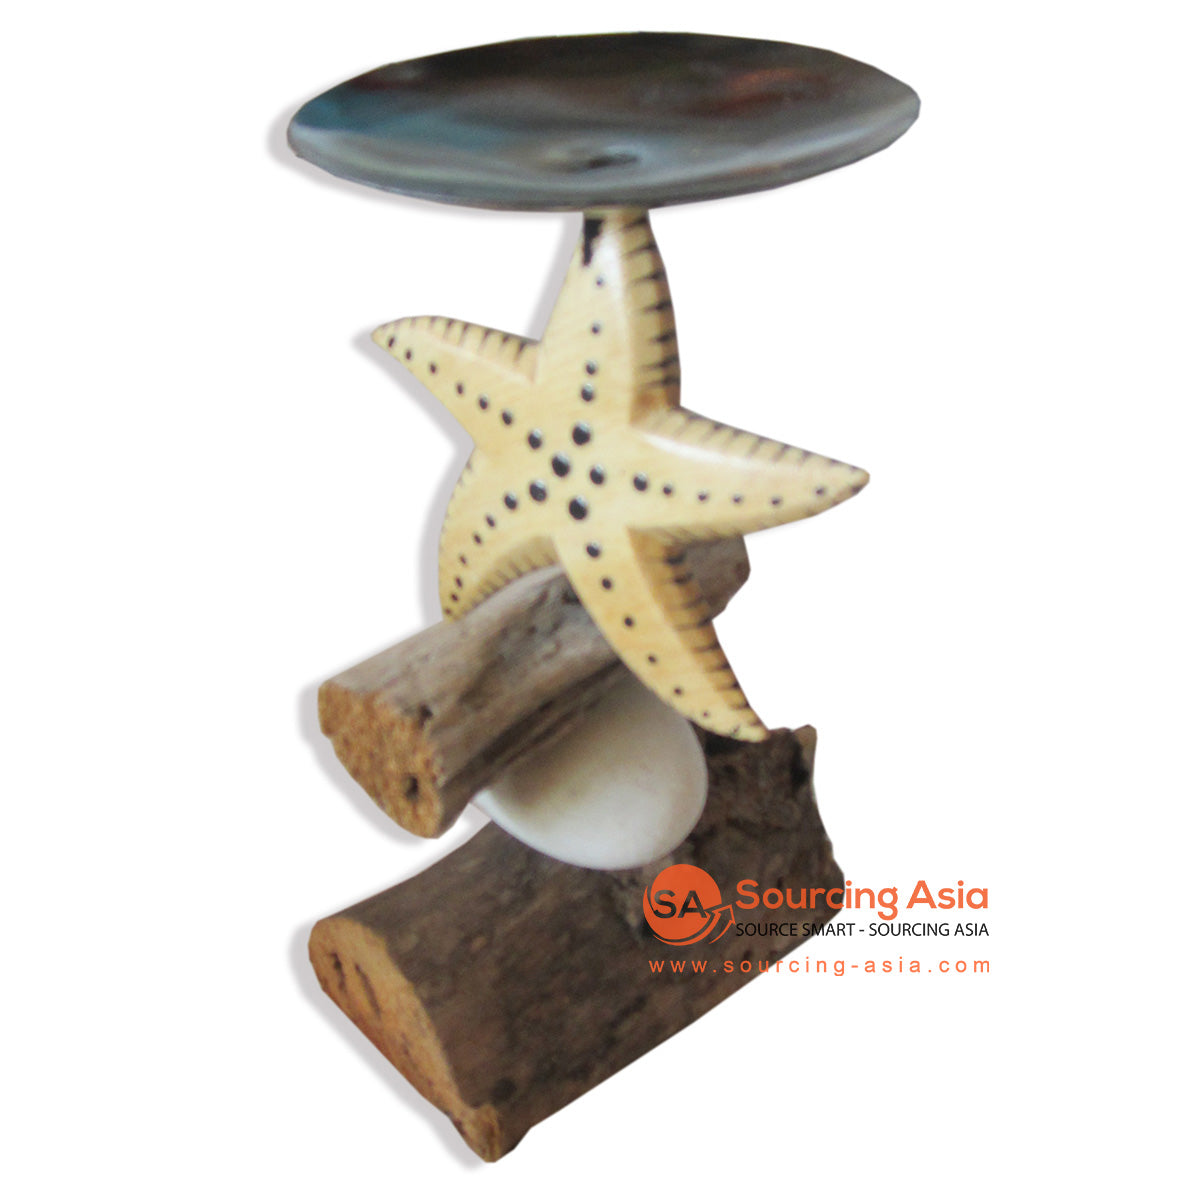 HAN004STR NATURAL WOODEN AND IRON STARFISH CANDLE HOLDER DECORATION